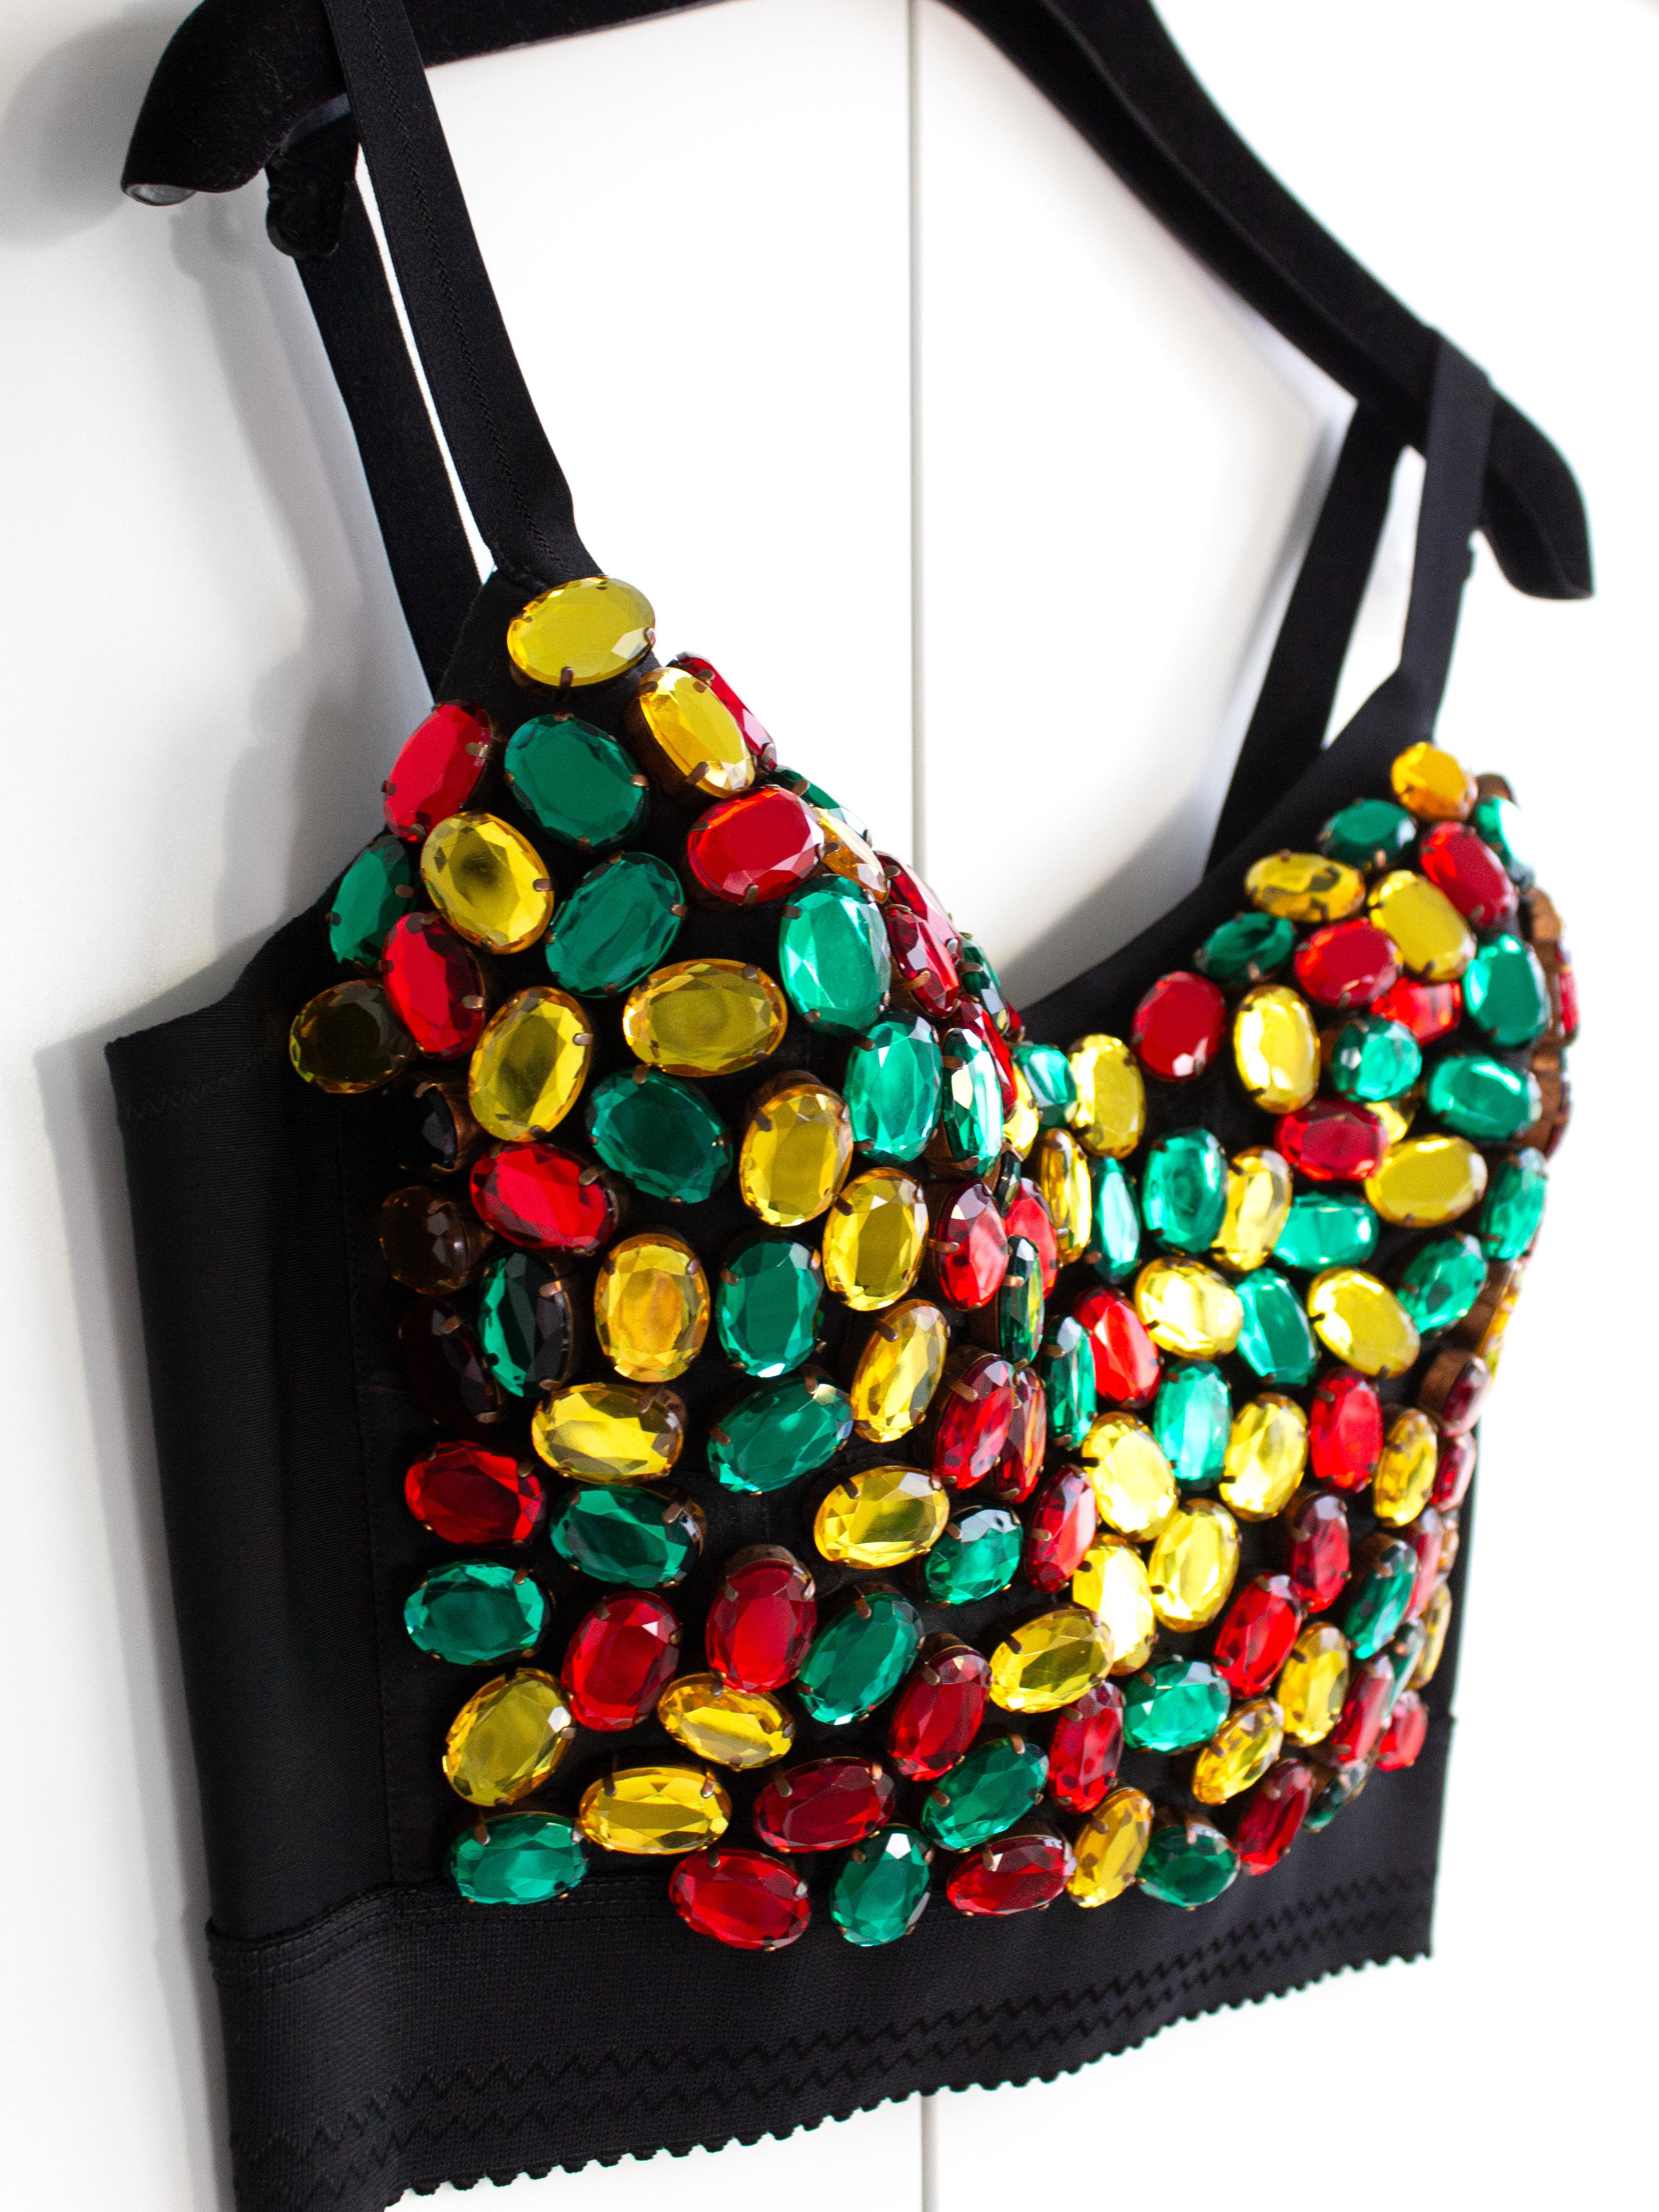 Dolce&Gabbana Vintage 1990s Rainbow Multicolor Crystal Candy Black Bustier Top In Good Condition For Sale In Jersey City, NJ